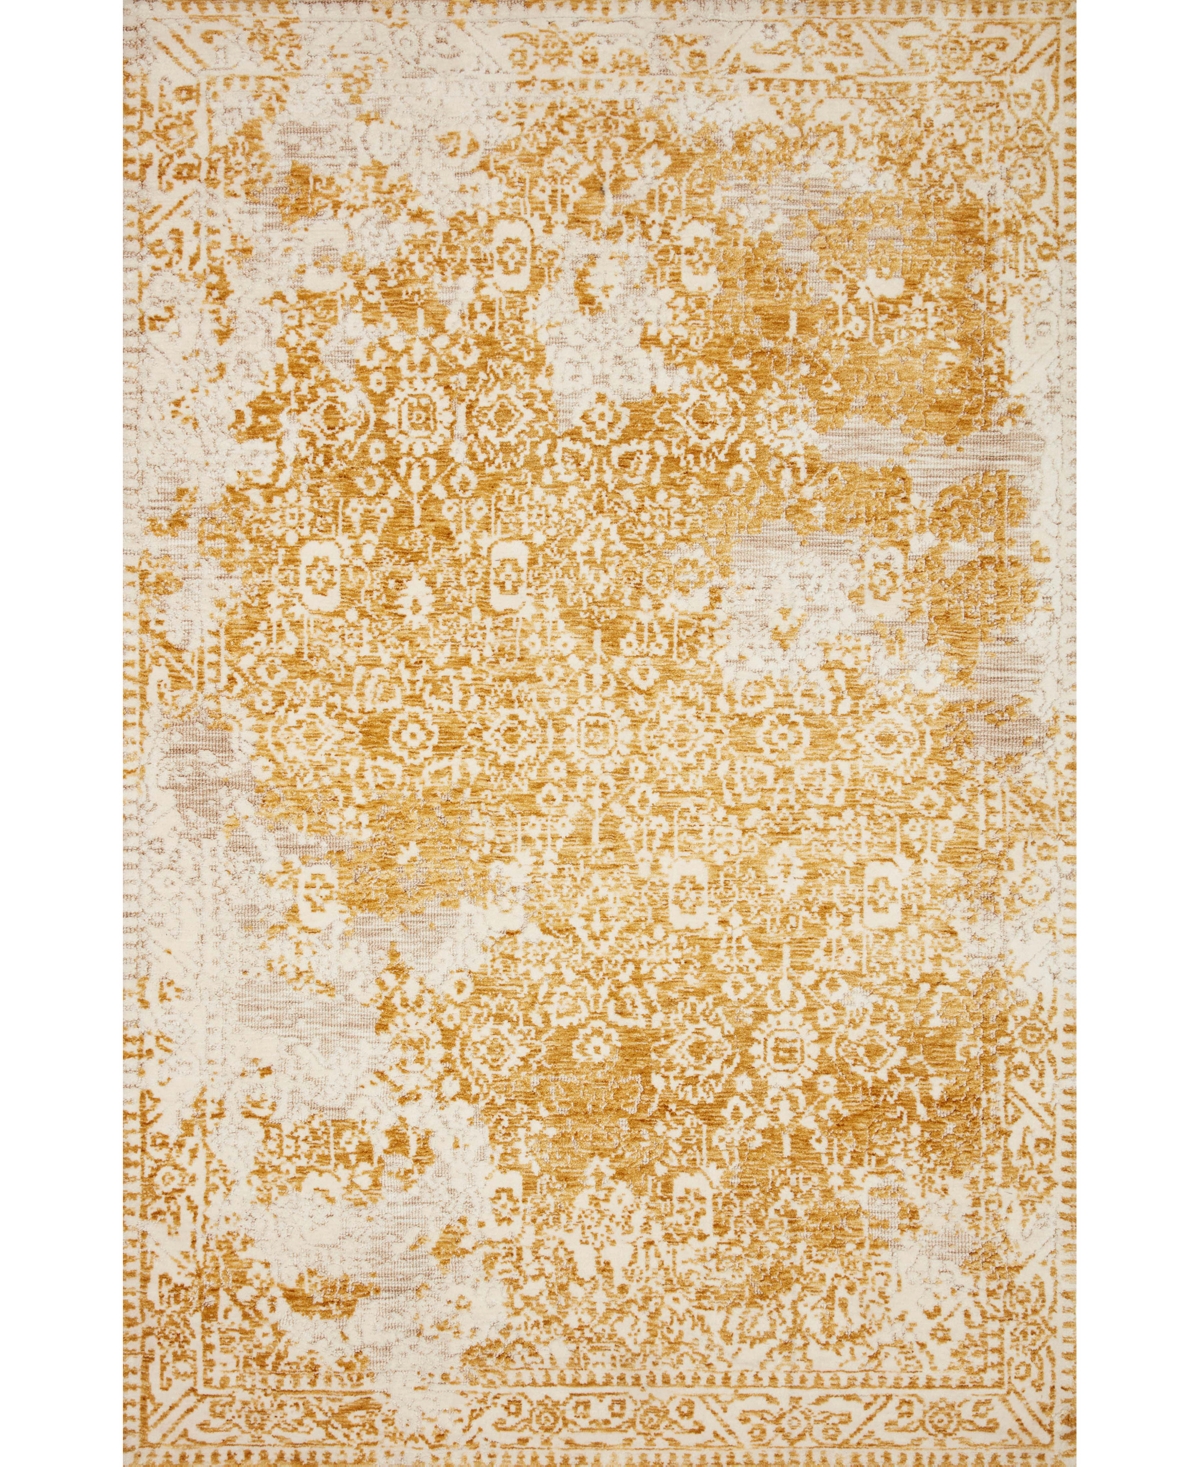 Magnolia Home By Joanna Gaines X Loloi Lindsay Lis-01 5' X 7'6" Area Rug In Gold,white